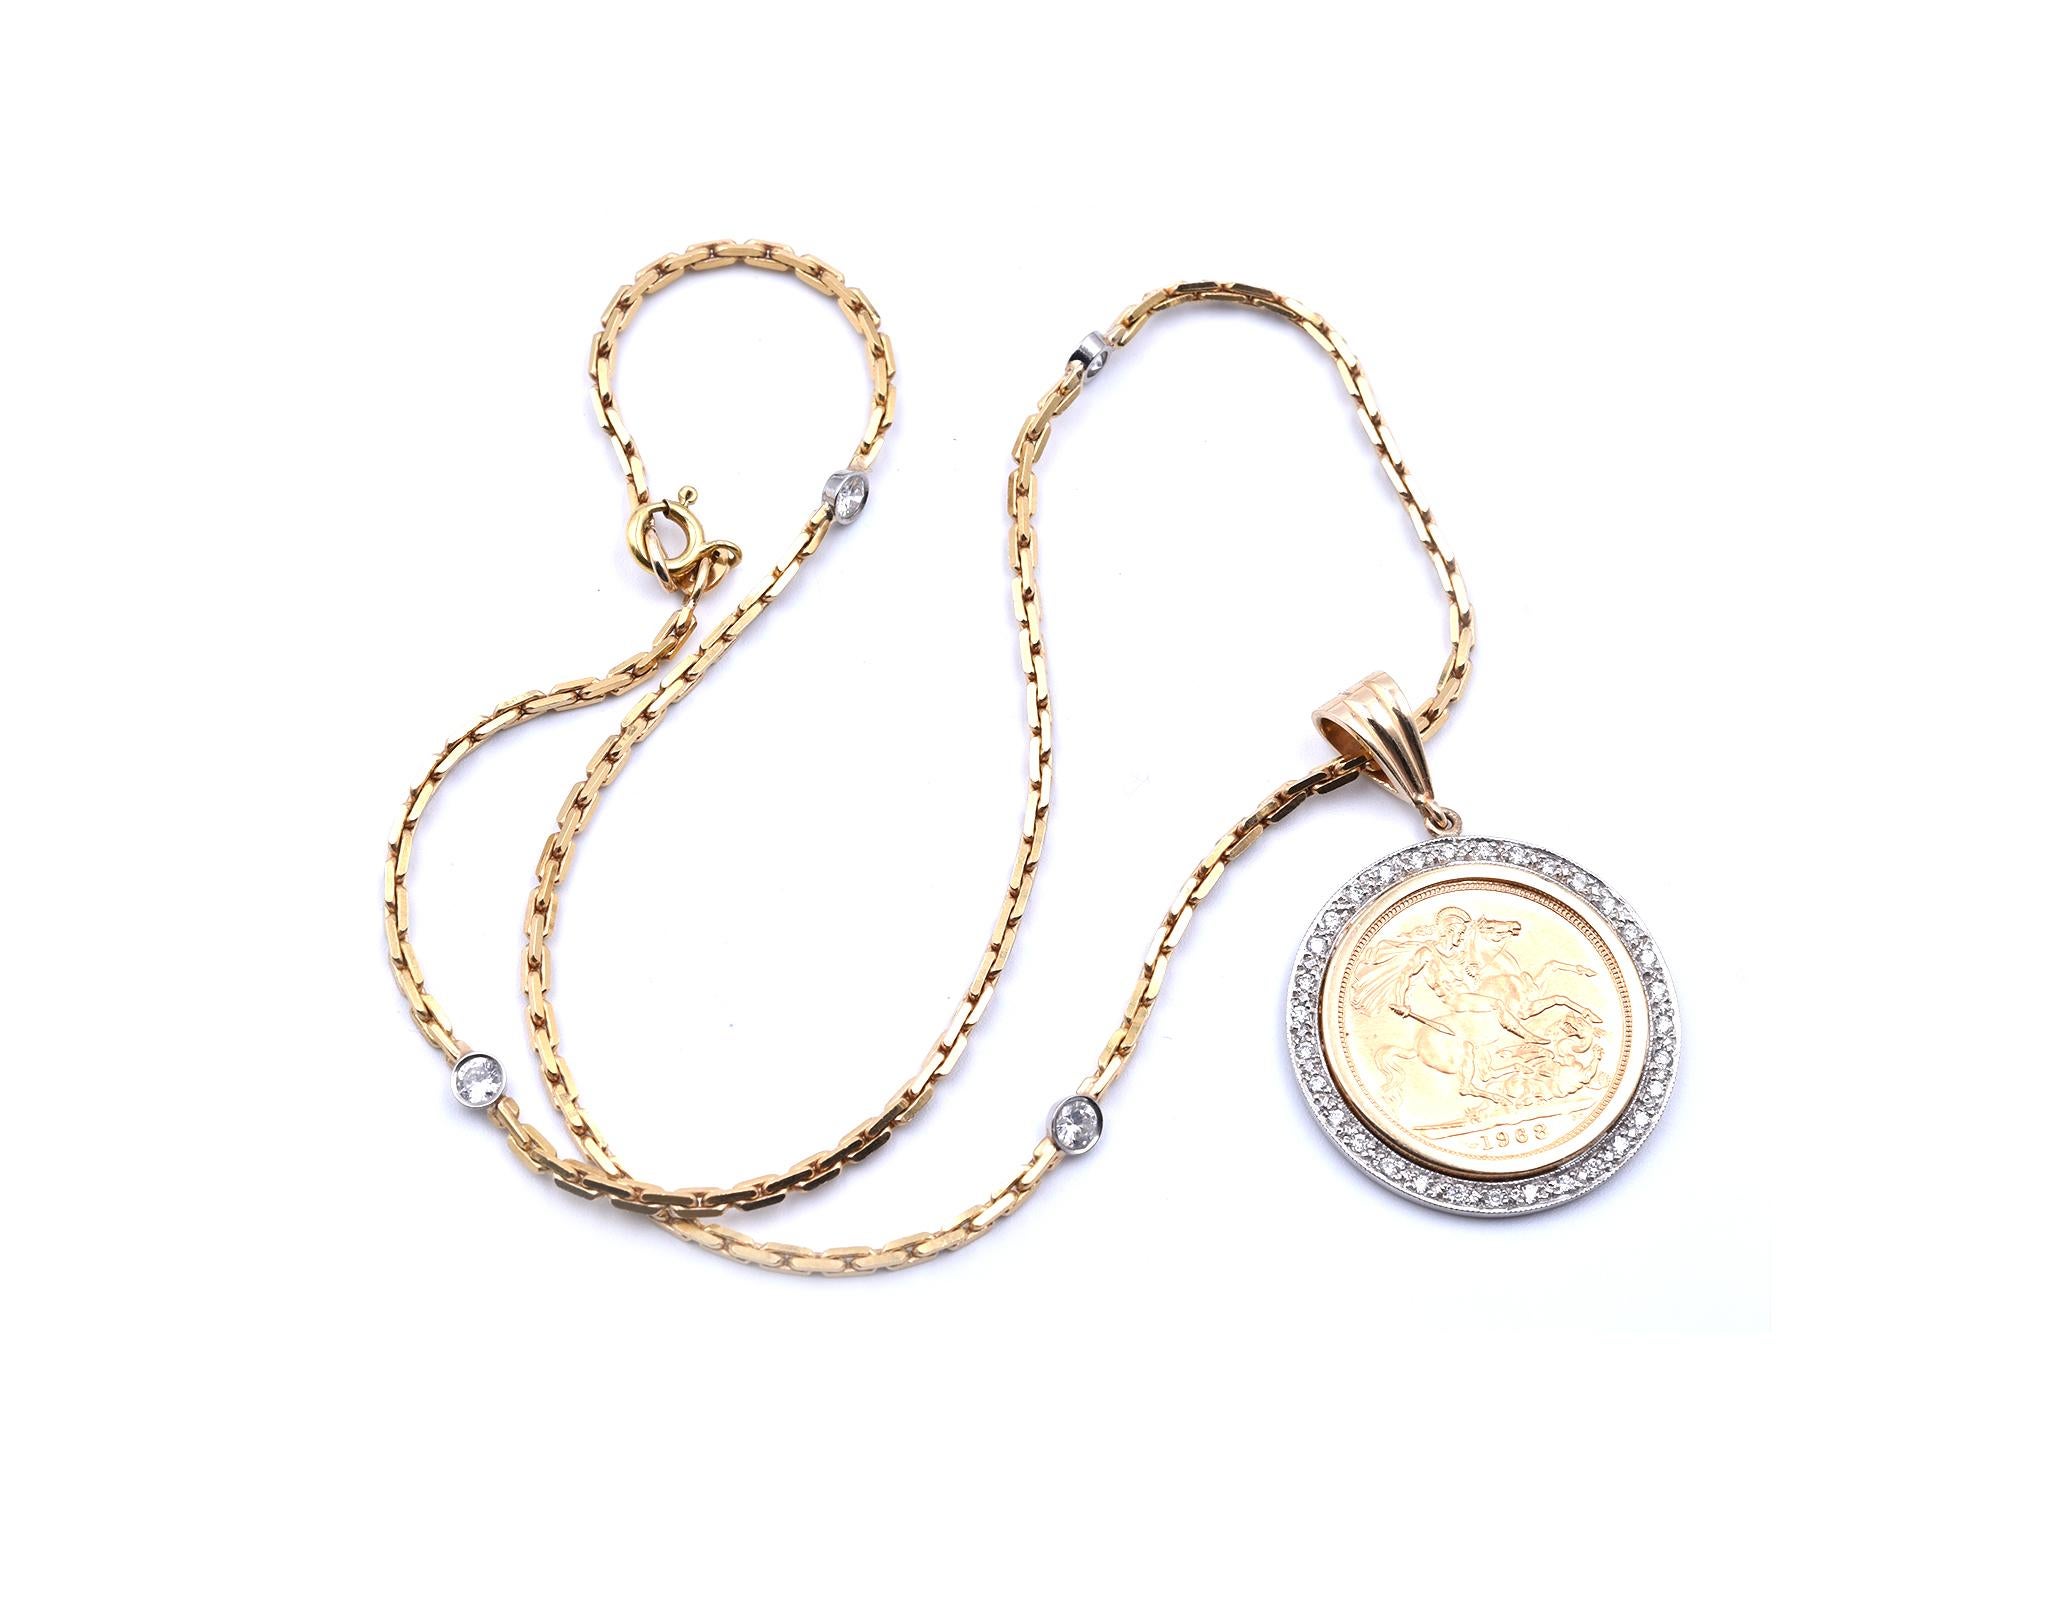 Designer: custom design
Material: 14k yellow gold
Diamonds: 33 round brilliant cut = .50cttw
Color: H
Clarity: SI
Dimensions: chain is 16” long and coin pendant is 1 ½ inches long and 27.70mm diameter 
Weight: 25.21 grams
